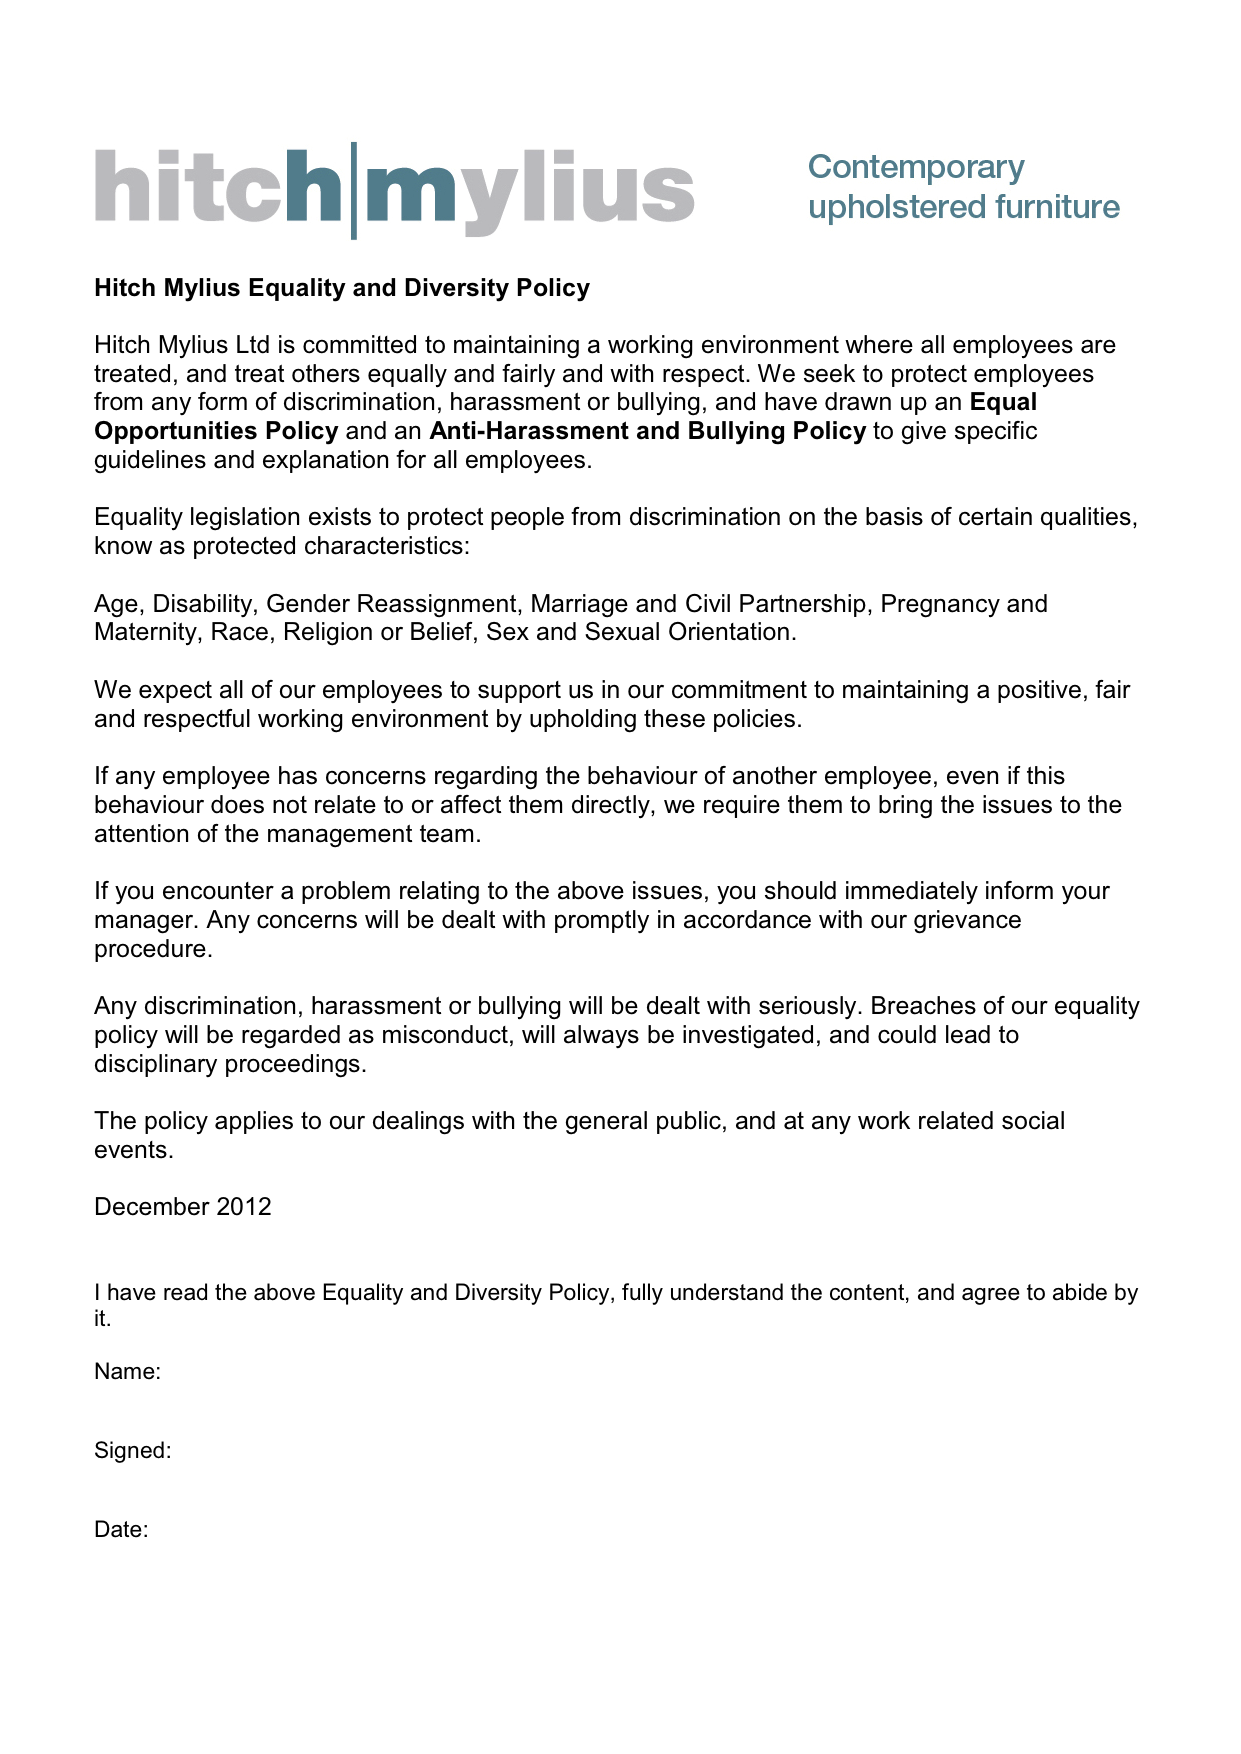 Equality and Diversity Policy Dec 2012